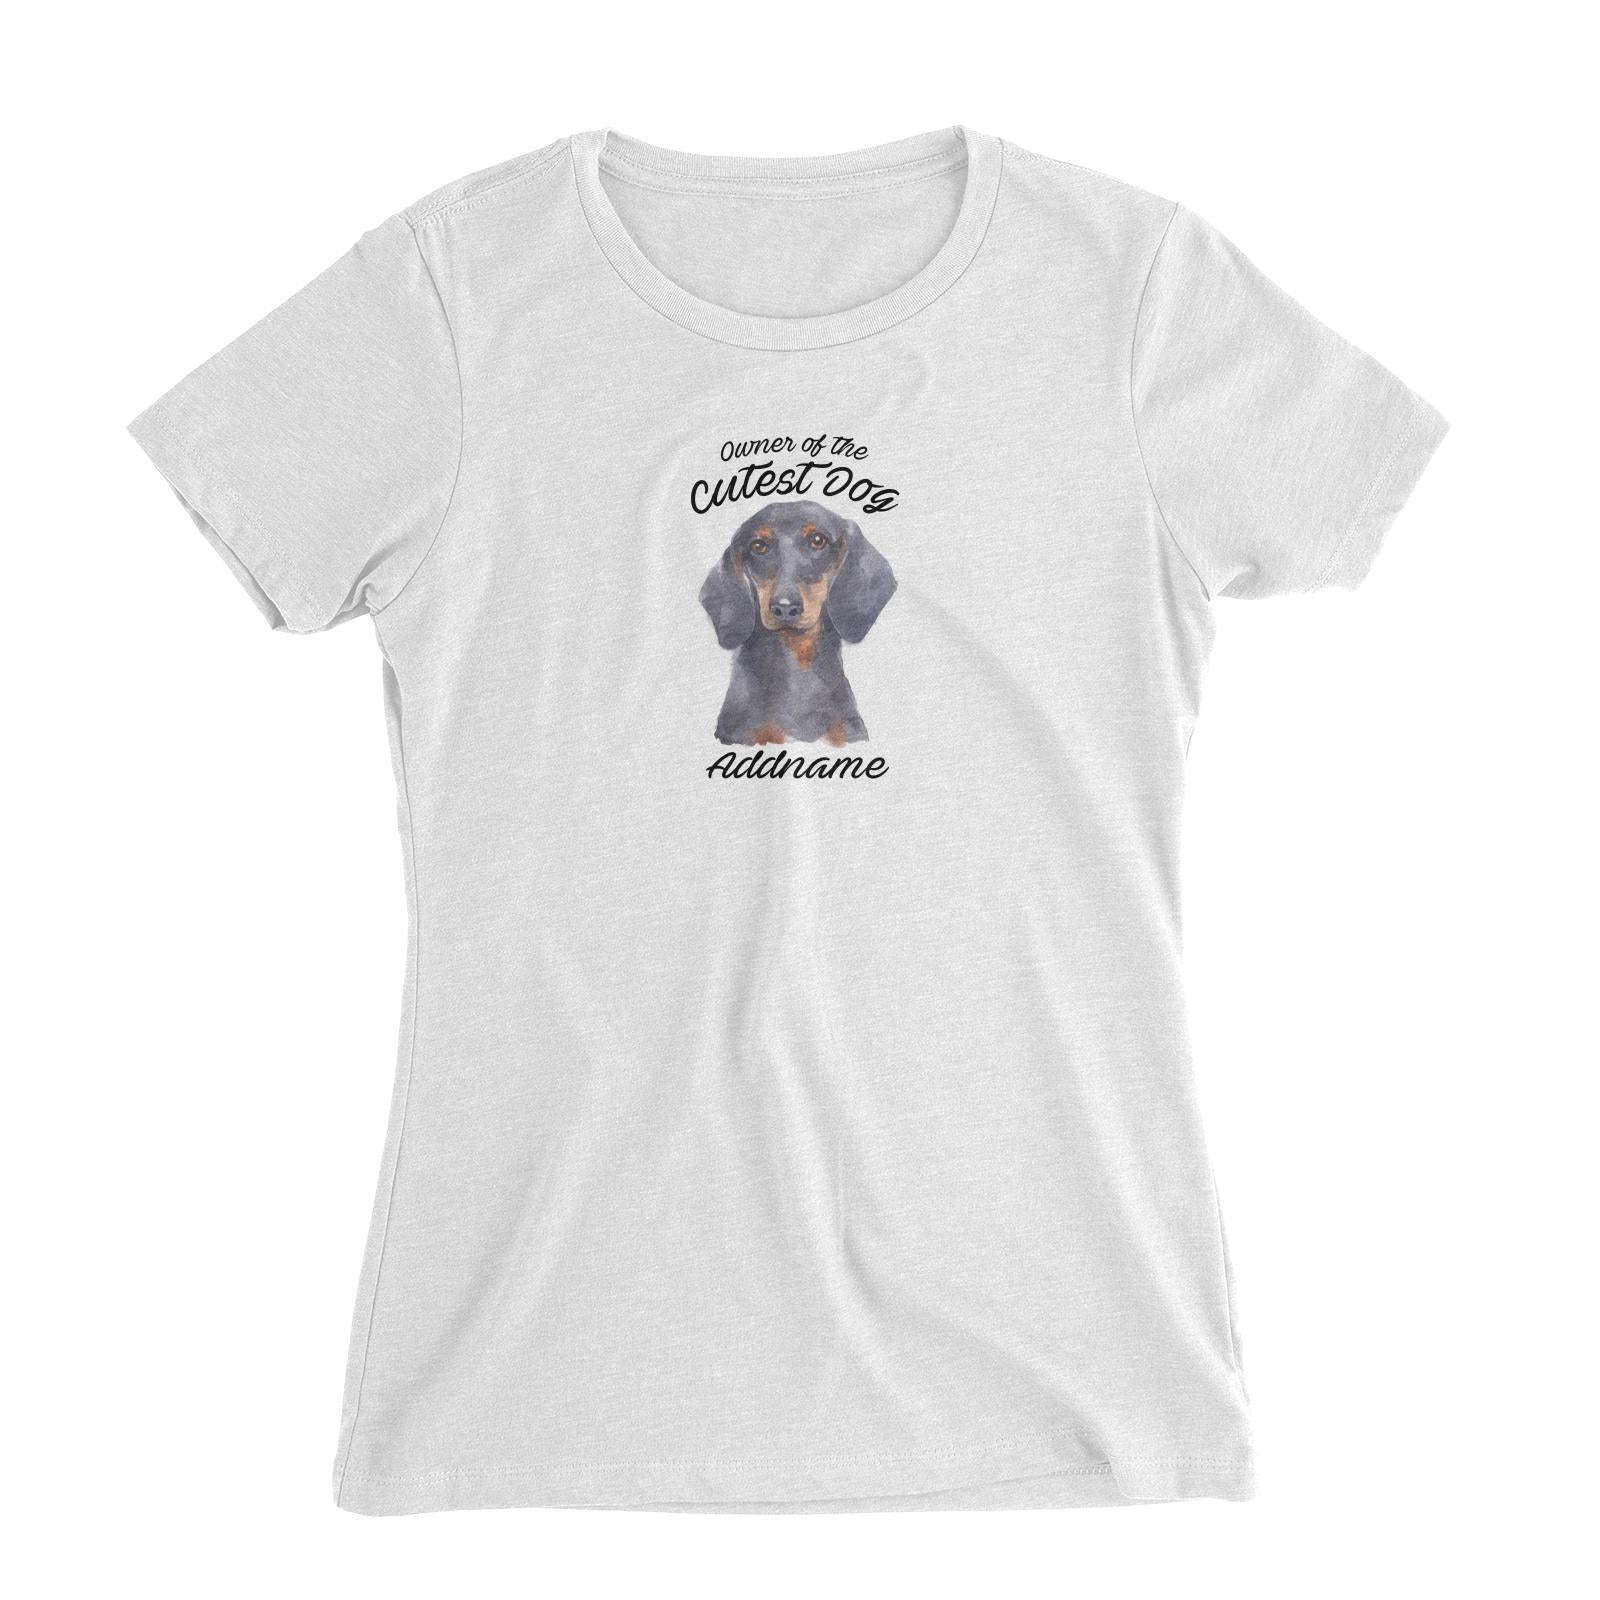 Watercolor Dog Owner Of The Cutest Dog Dachshund Addname Women's Slim Fit T-Shirt